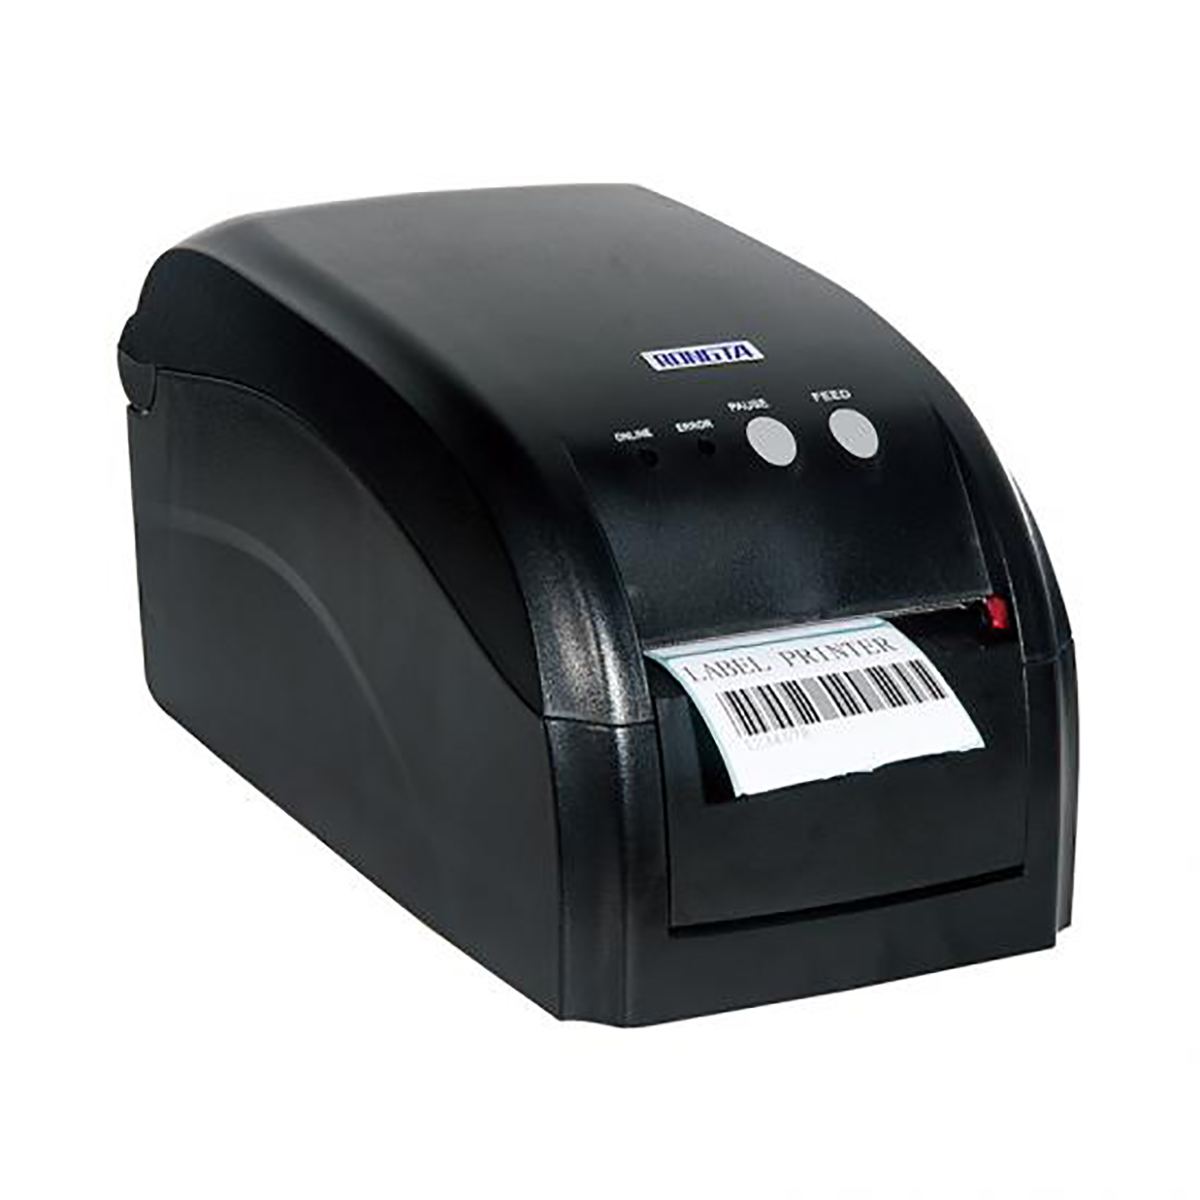 Rongta RP80VI 6 inch/sec High Printing Speed Label Barcode Print